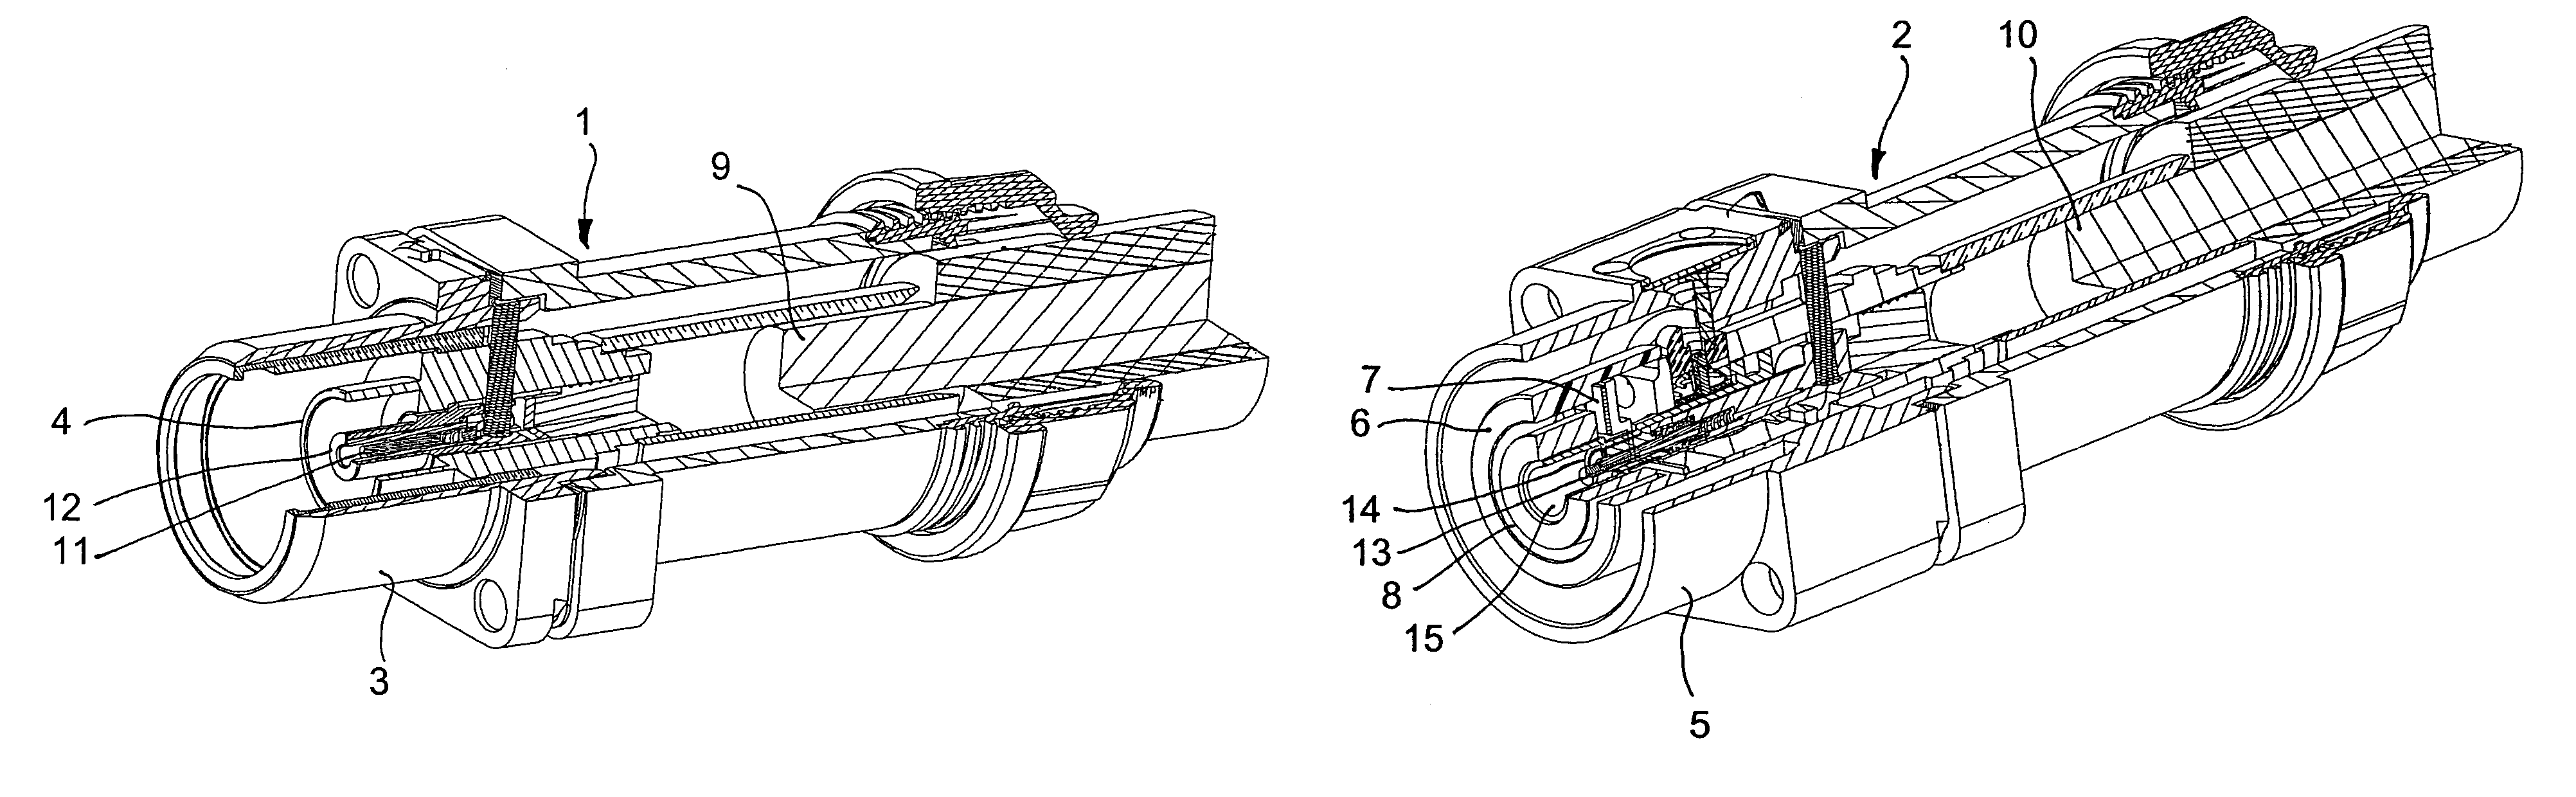 Electrical connection device provided with at least one tubular end contact